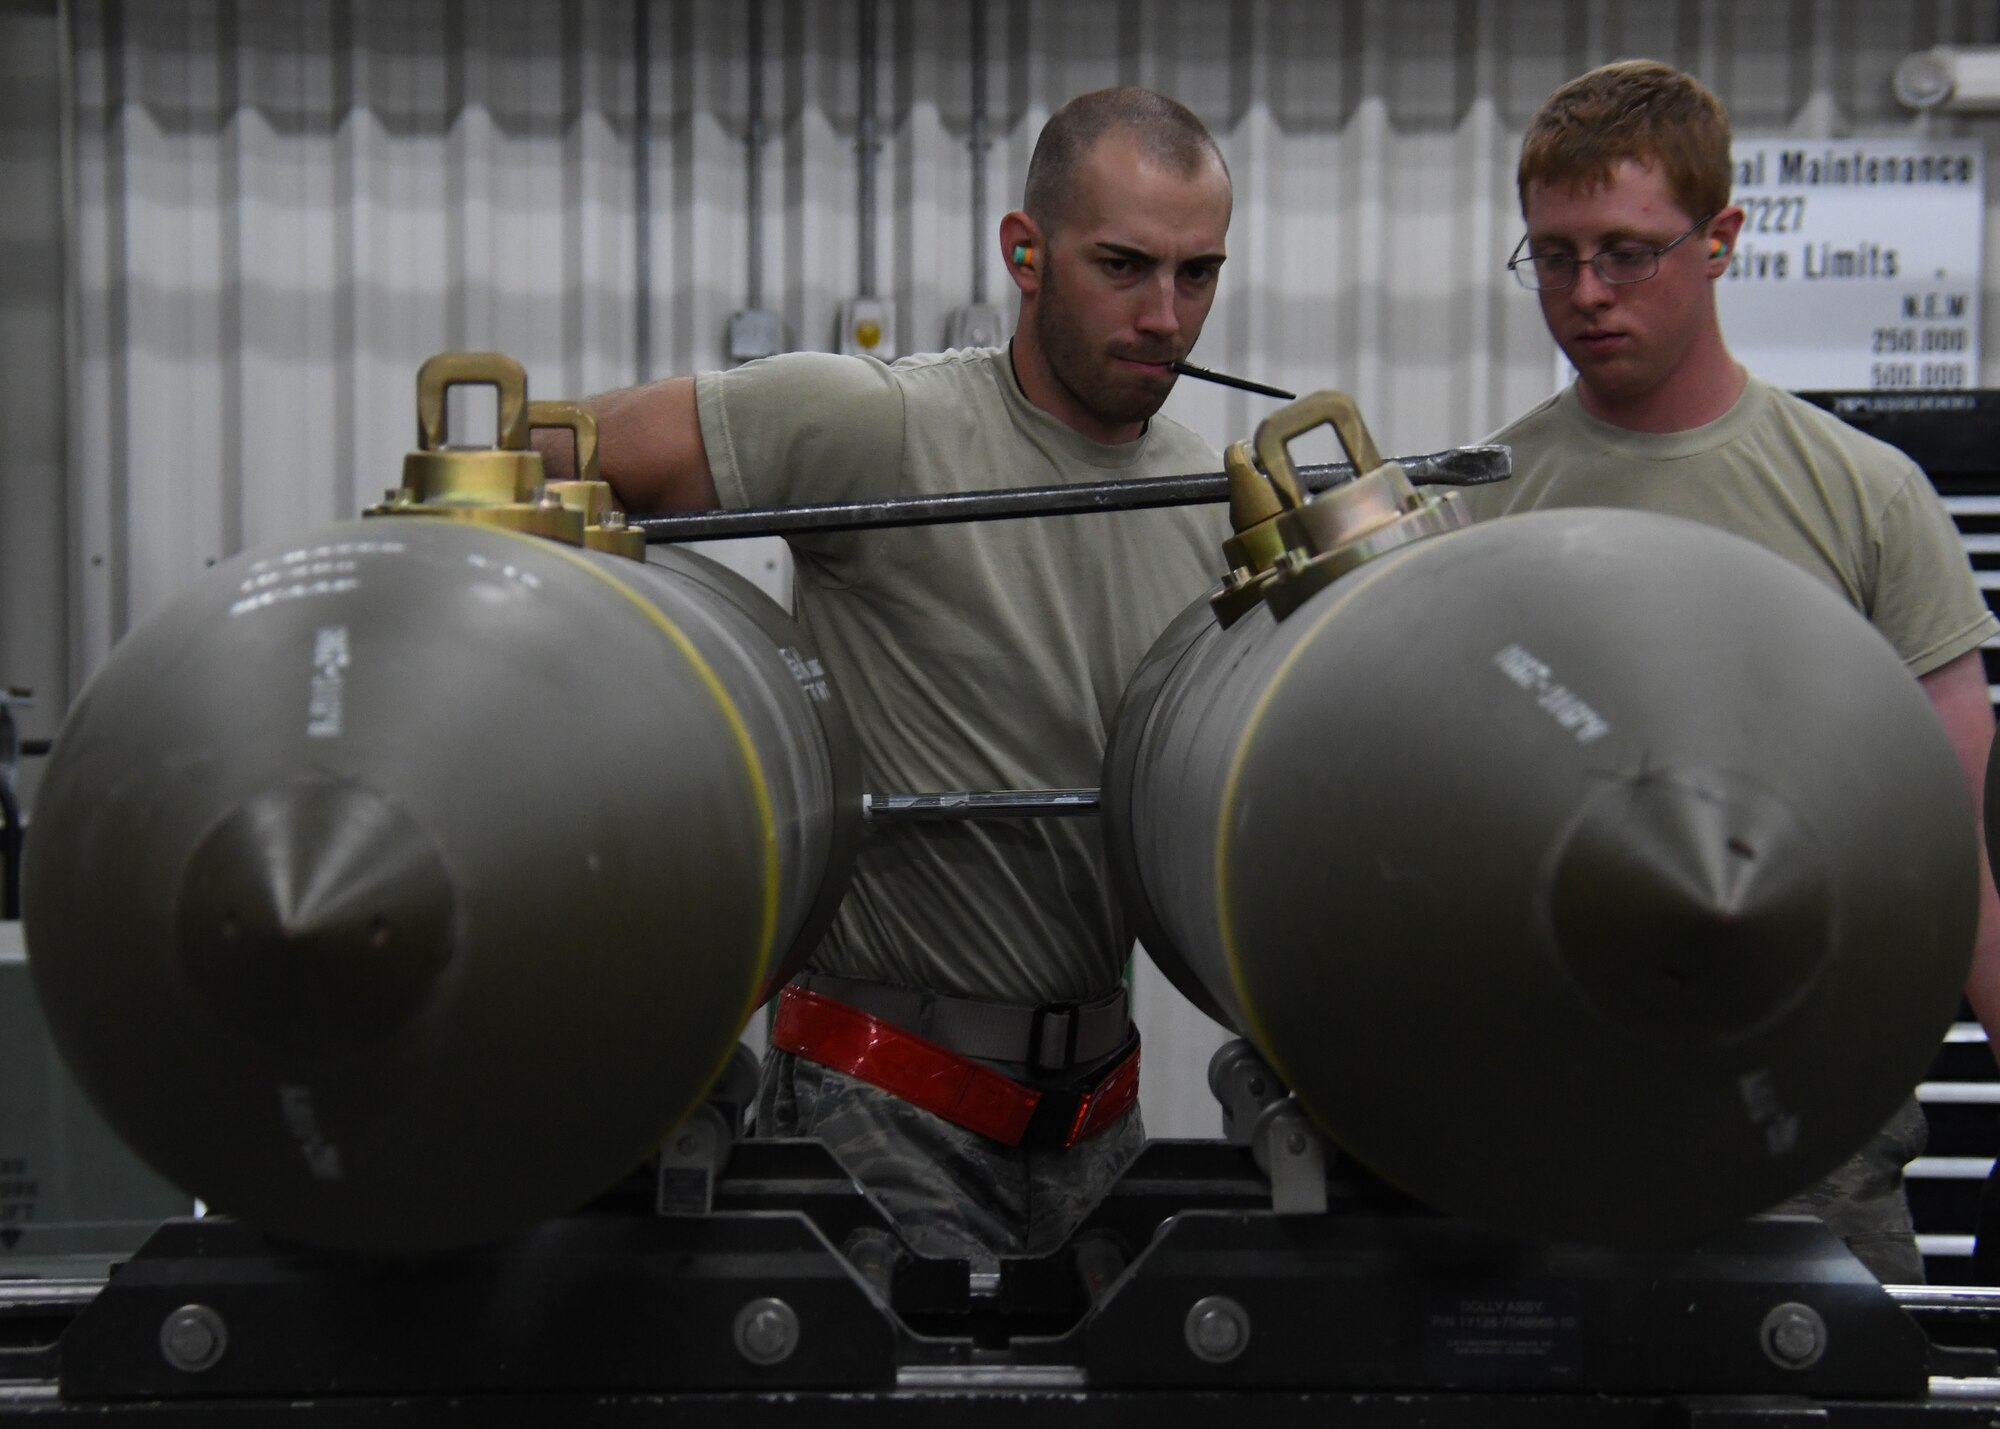 U.S. Air Force Airman 1st Class Joshua Despain, left, and Senior Airman Alex Caton, both ammo Airmen with the 379th Expeditionary Maintenance Squadron, install and torque the fuse on a guided bomb unit-31 at Al Udeid Air Base, Qatar, April 6, 2017. Ammo Airmen are responsible for assembling bombs and munitions, and must do so with the greatest attention to detail, or risk a malfunction or misfire with the bombs. (U.S. Air Force photo by Staff Sergeant Miles Wilson)